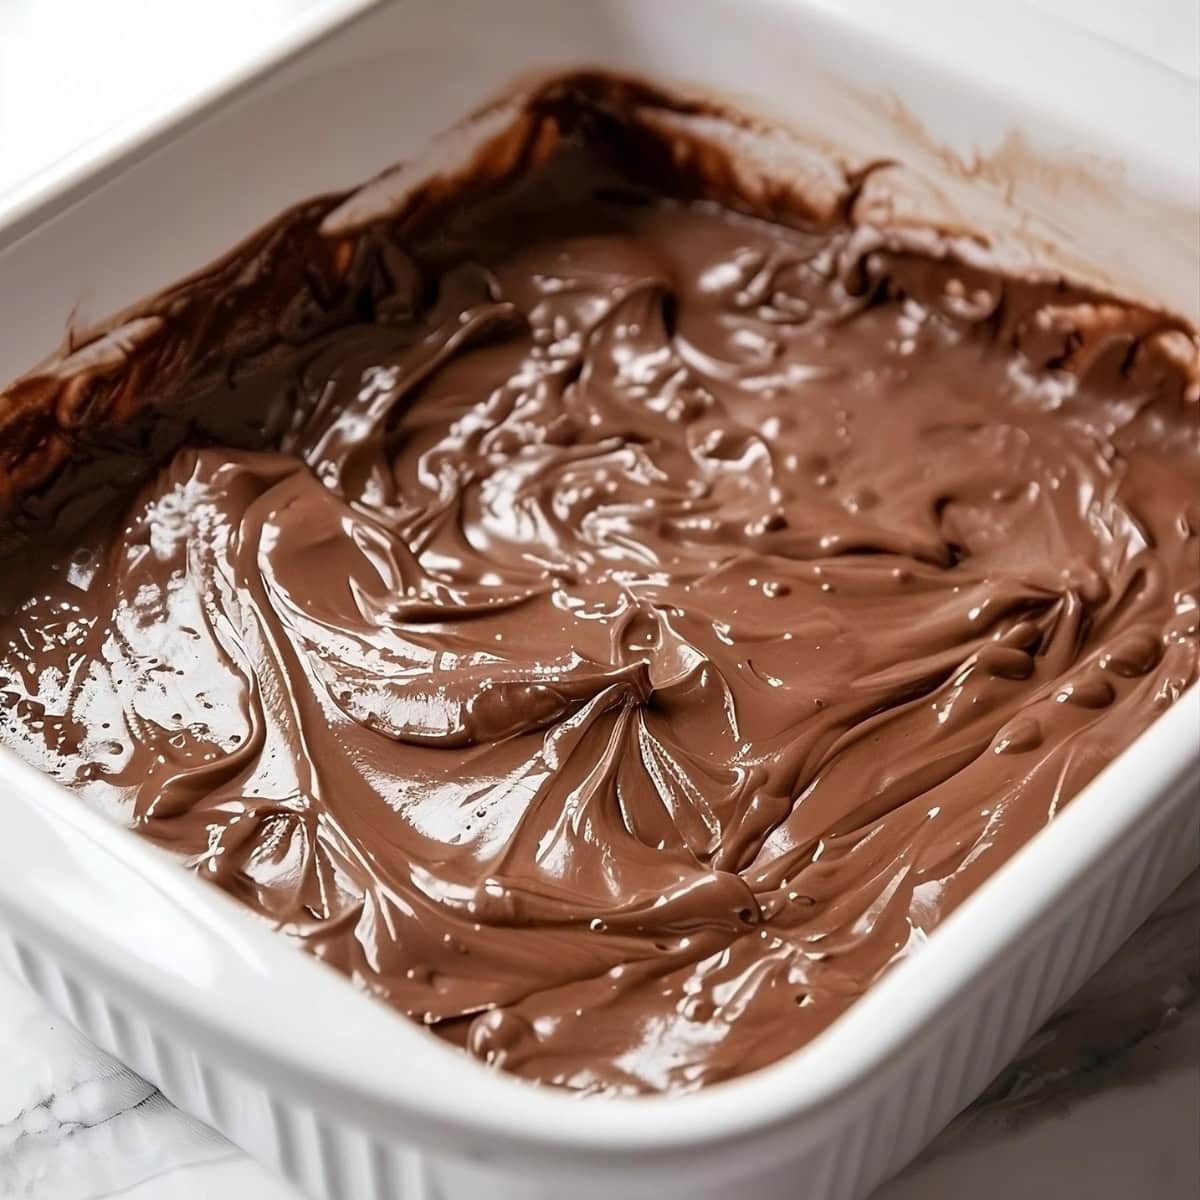 Chocolate batter spread in a baking dish.